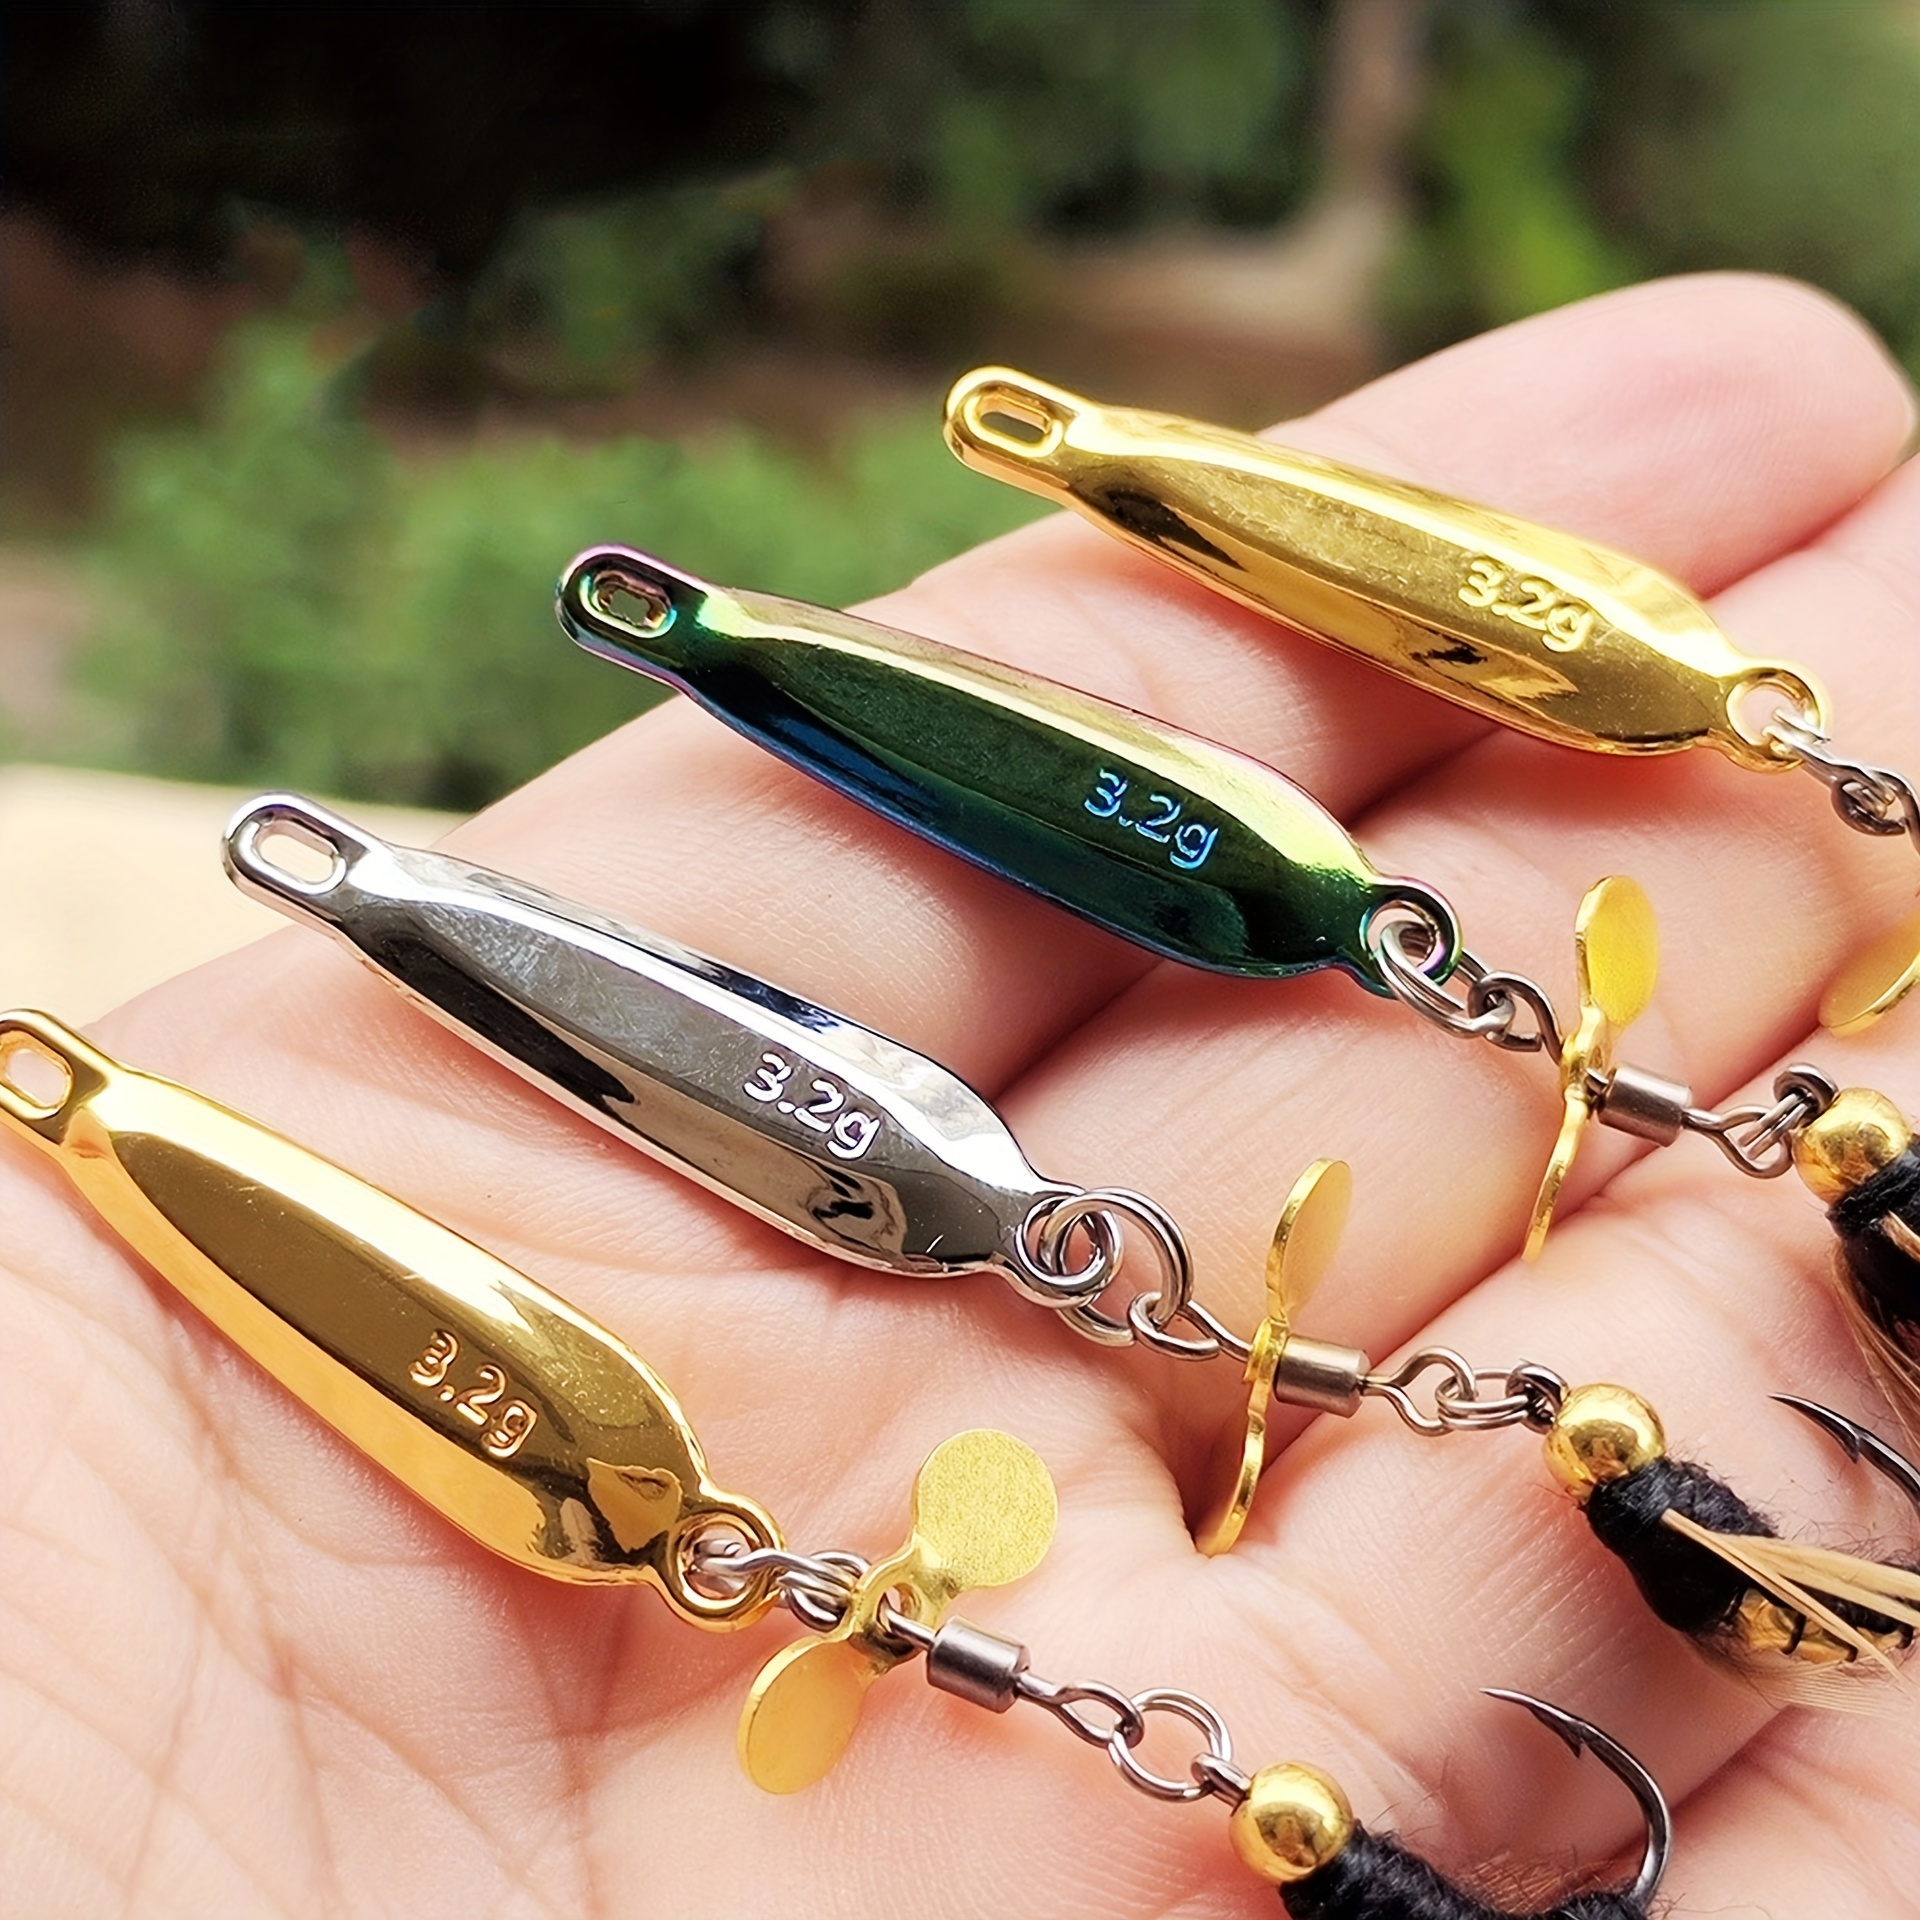 BE-TOOL 5Pcs Spoon Fishing Lure, Metal Sequins Fishing Bait with